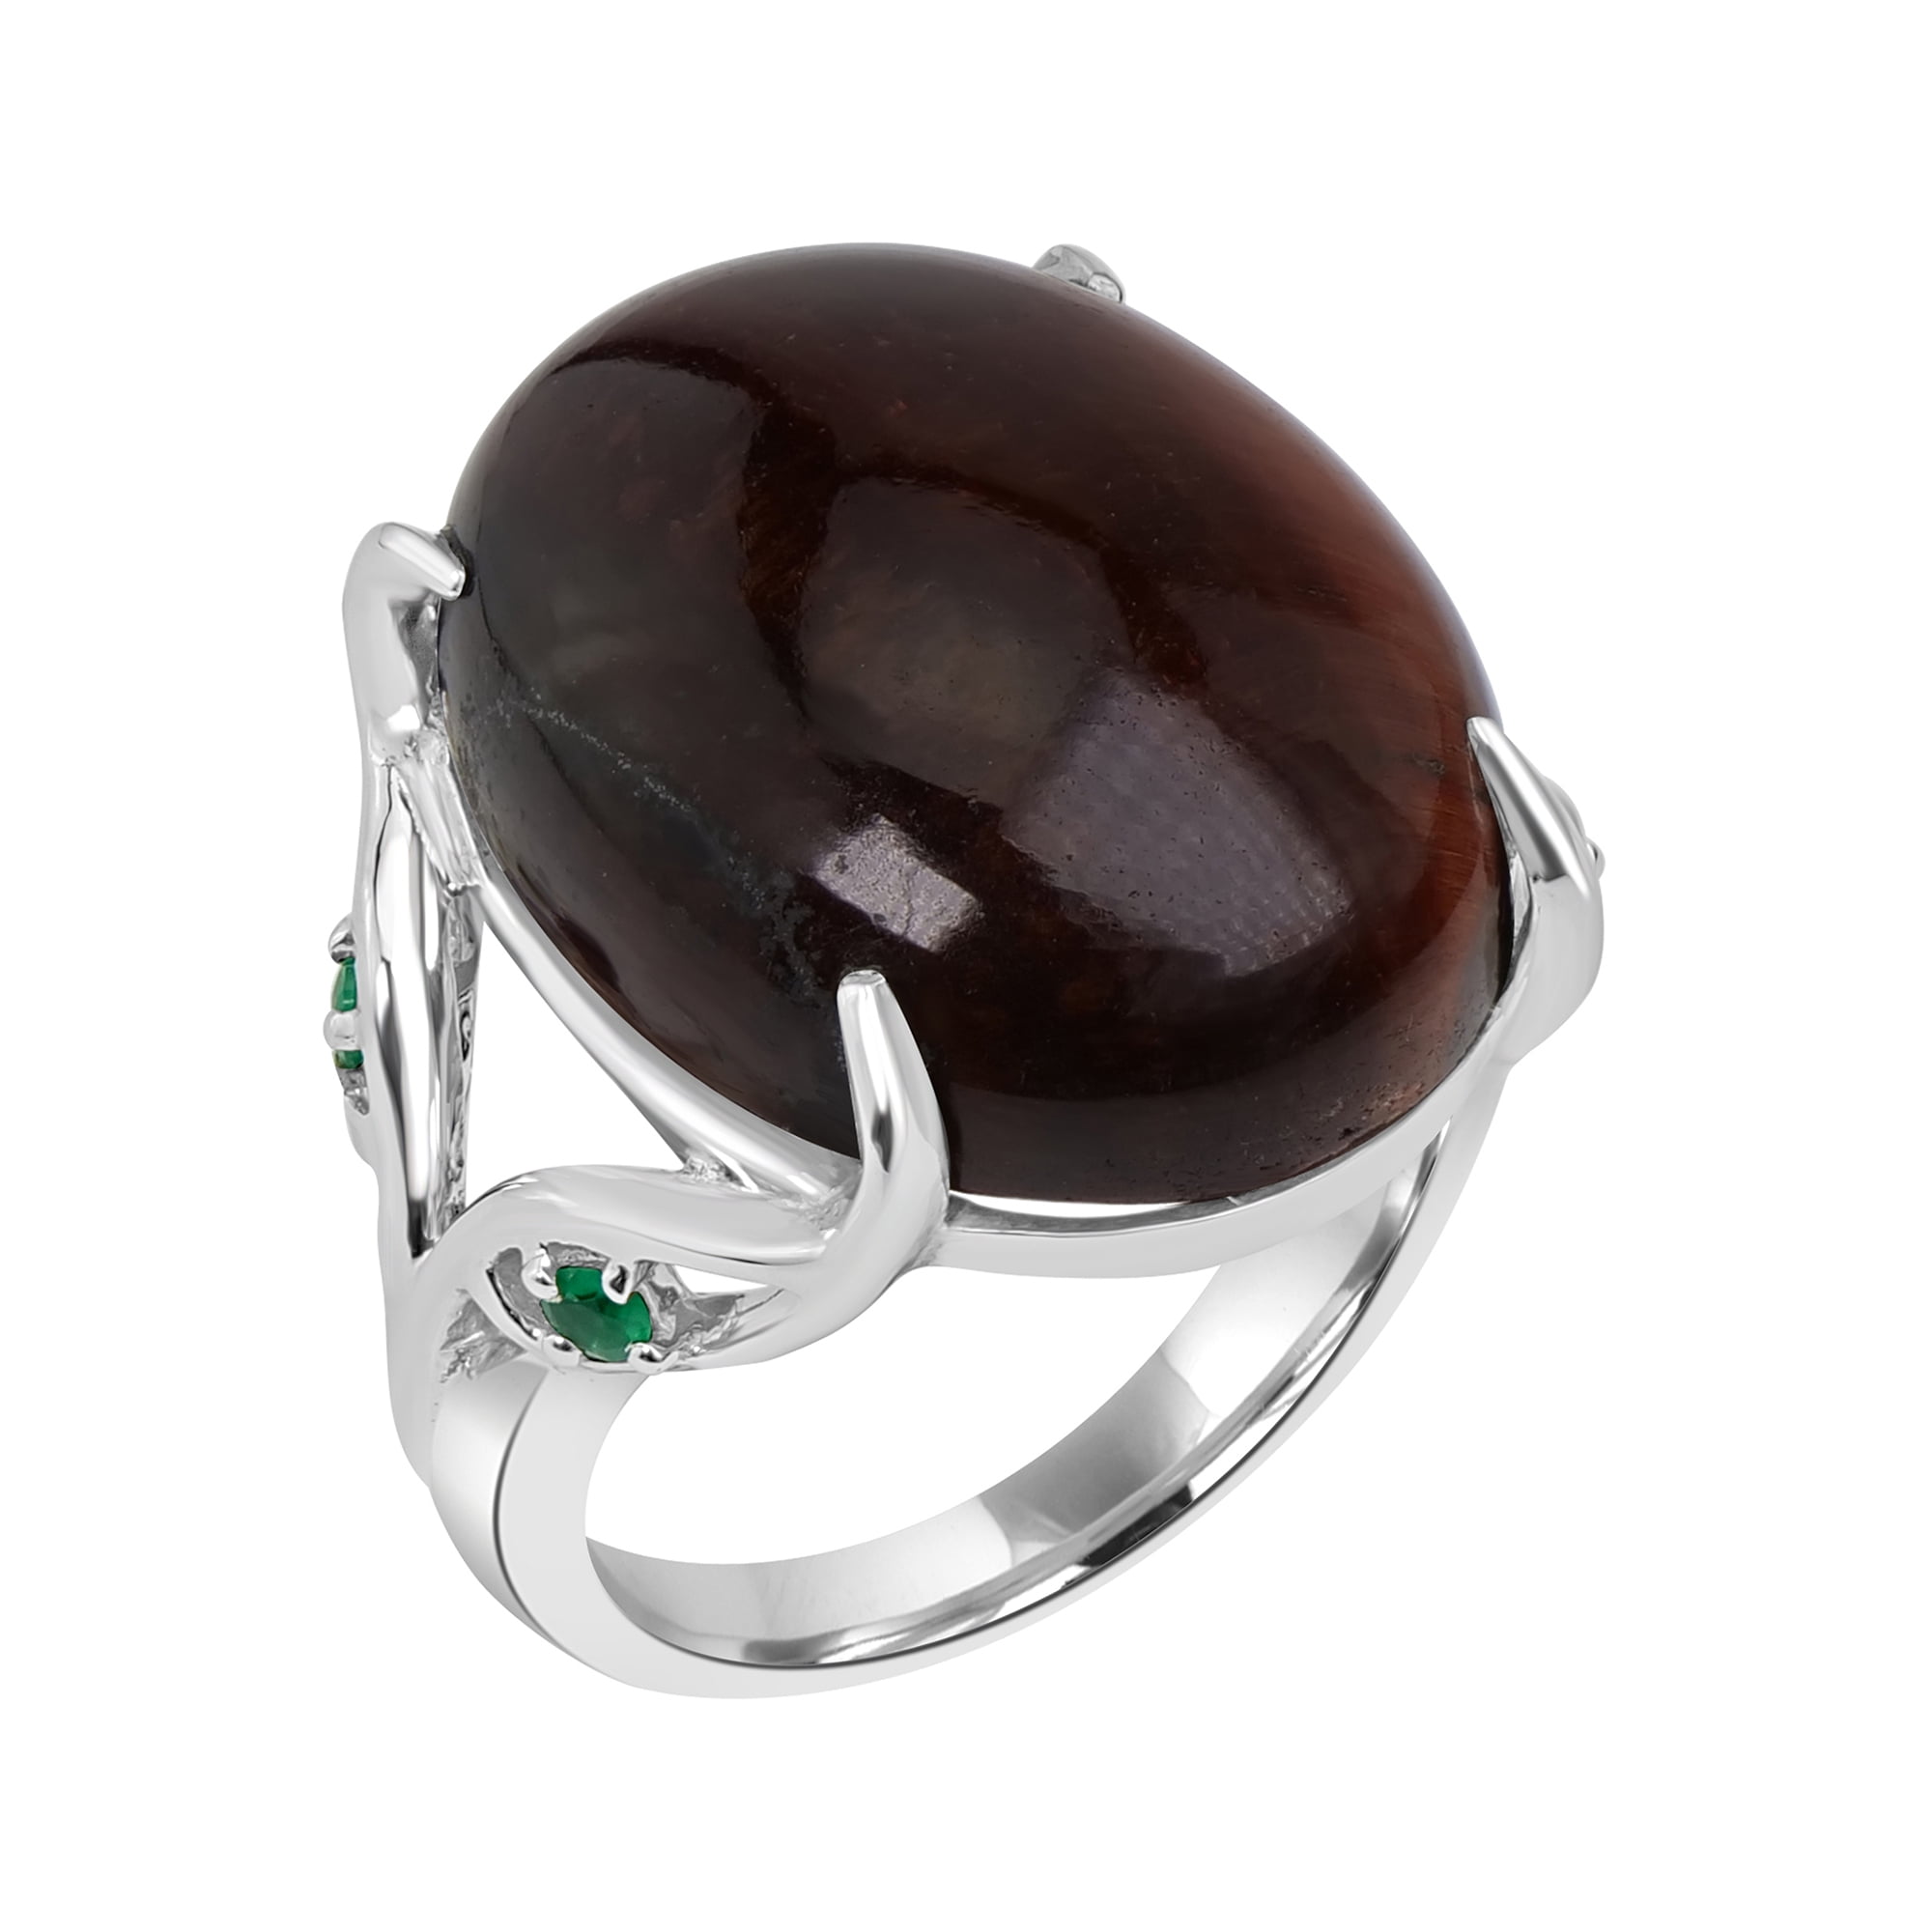 Sterling Silver Statement Ring with round Tigers eye cabochon gemstone and twisted 925 Sterling Silver band